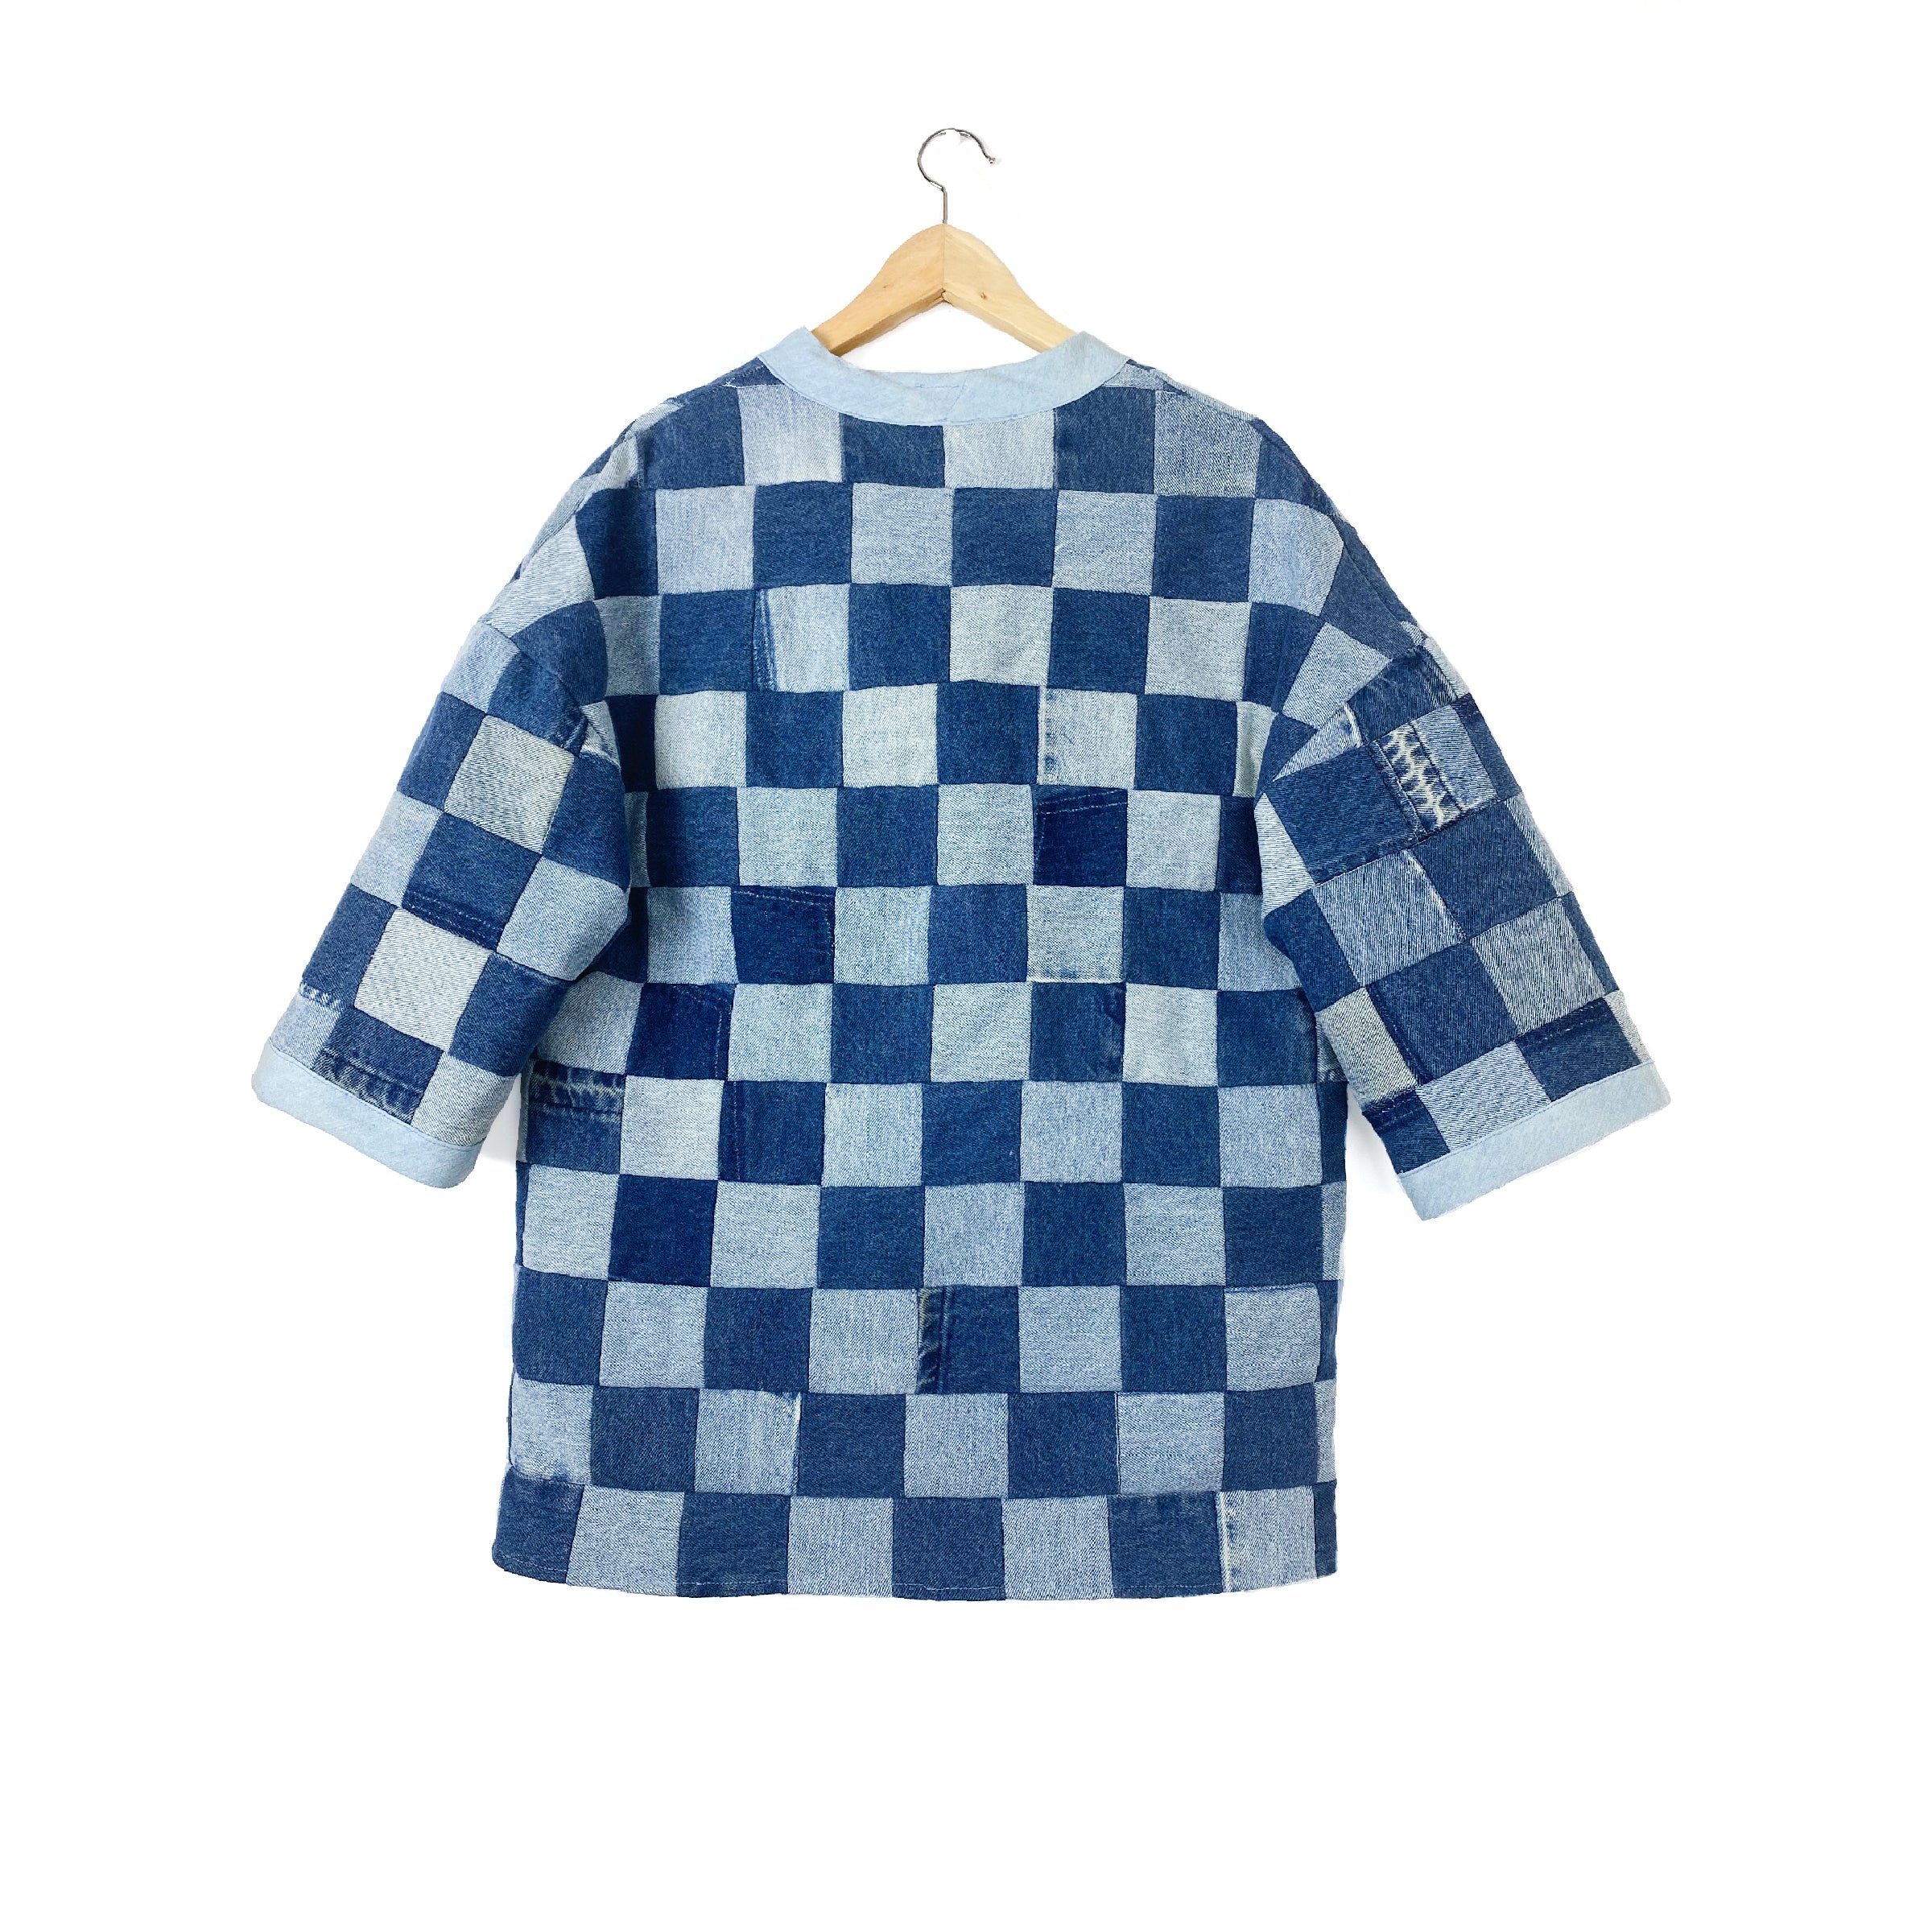 "Patchwork Checkerboard" Denim  Lounger Jacket - Late to the Party